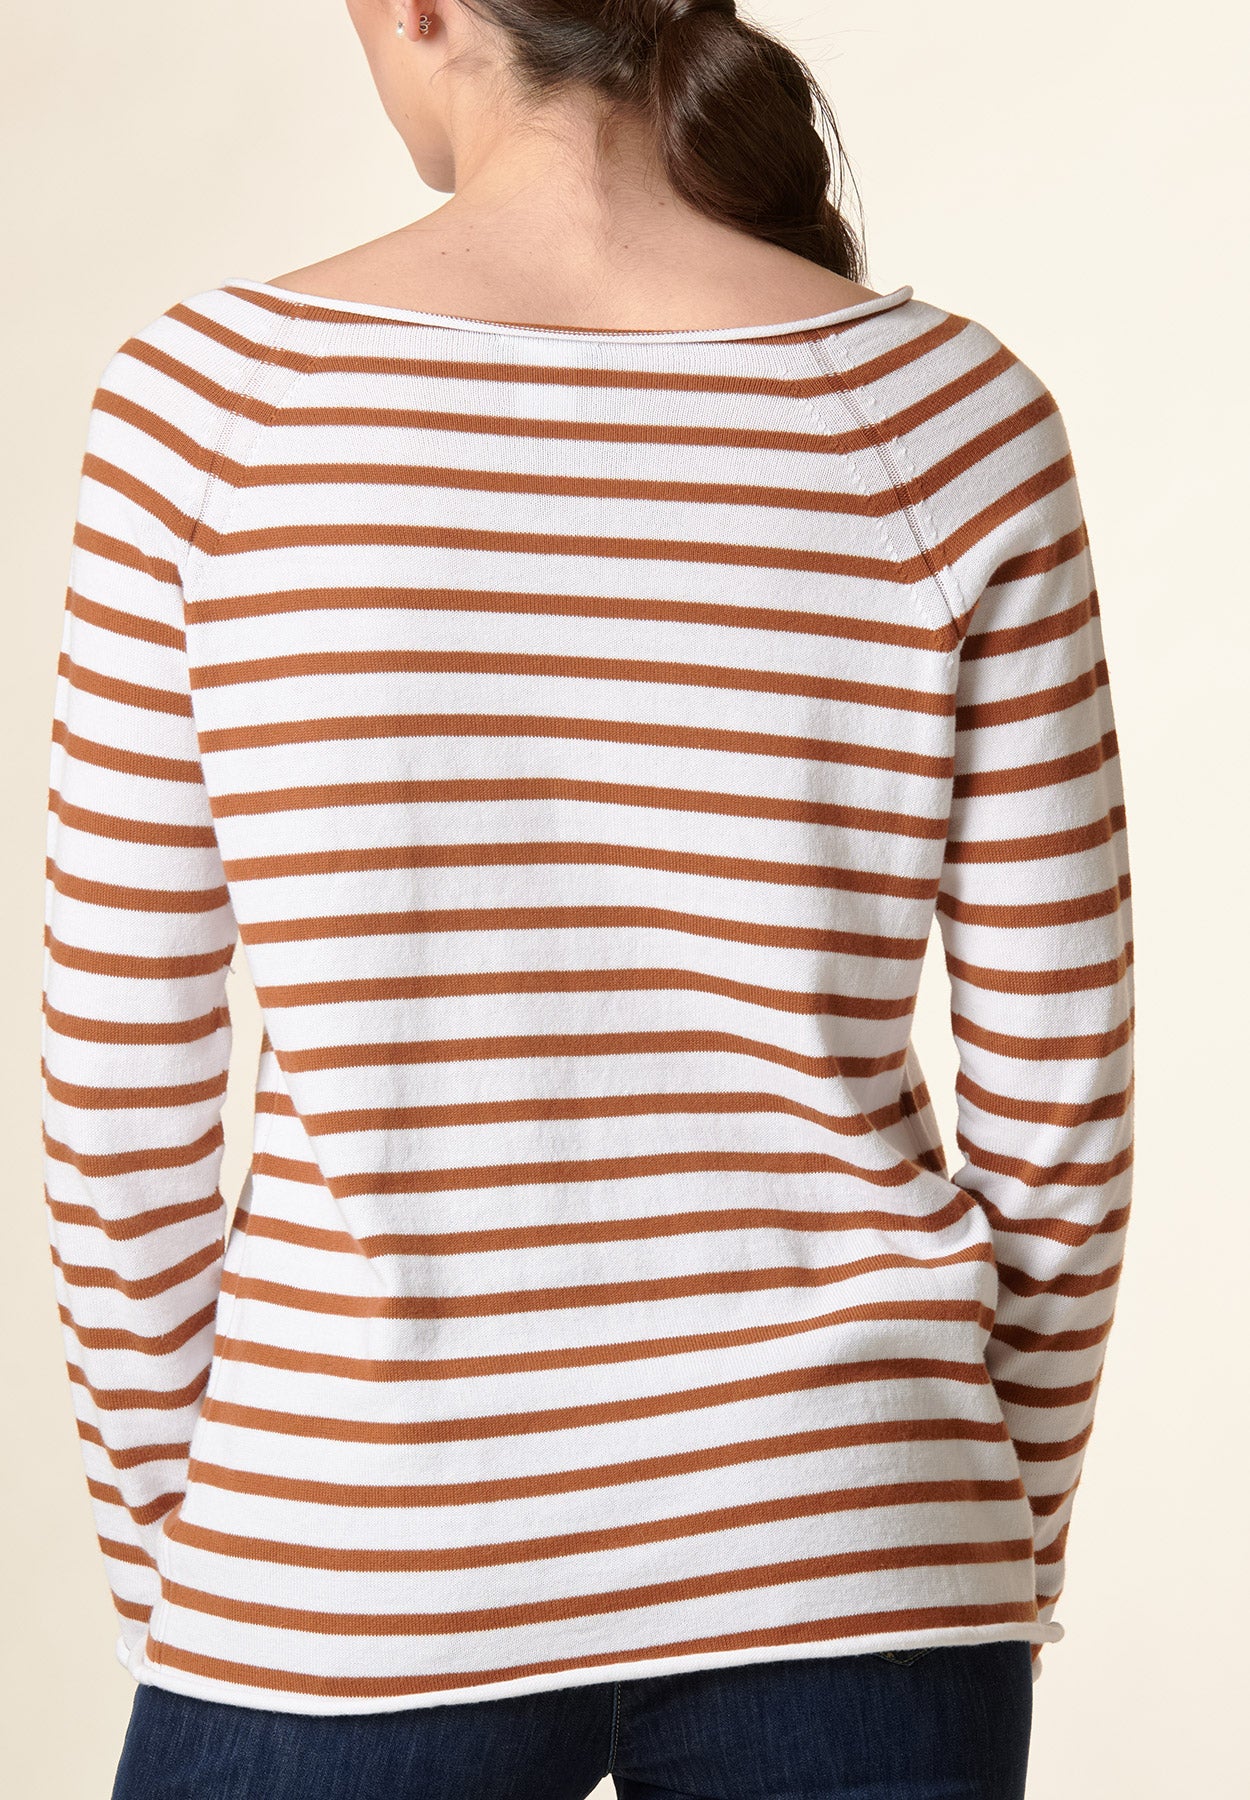 White-tobacco sweater boat stripes roll on